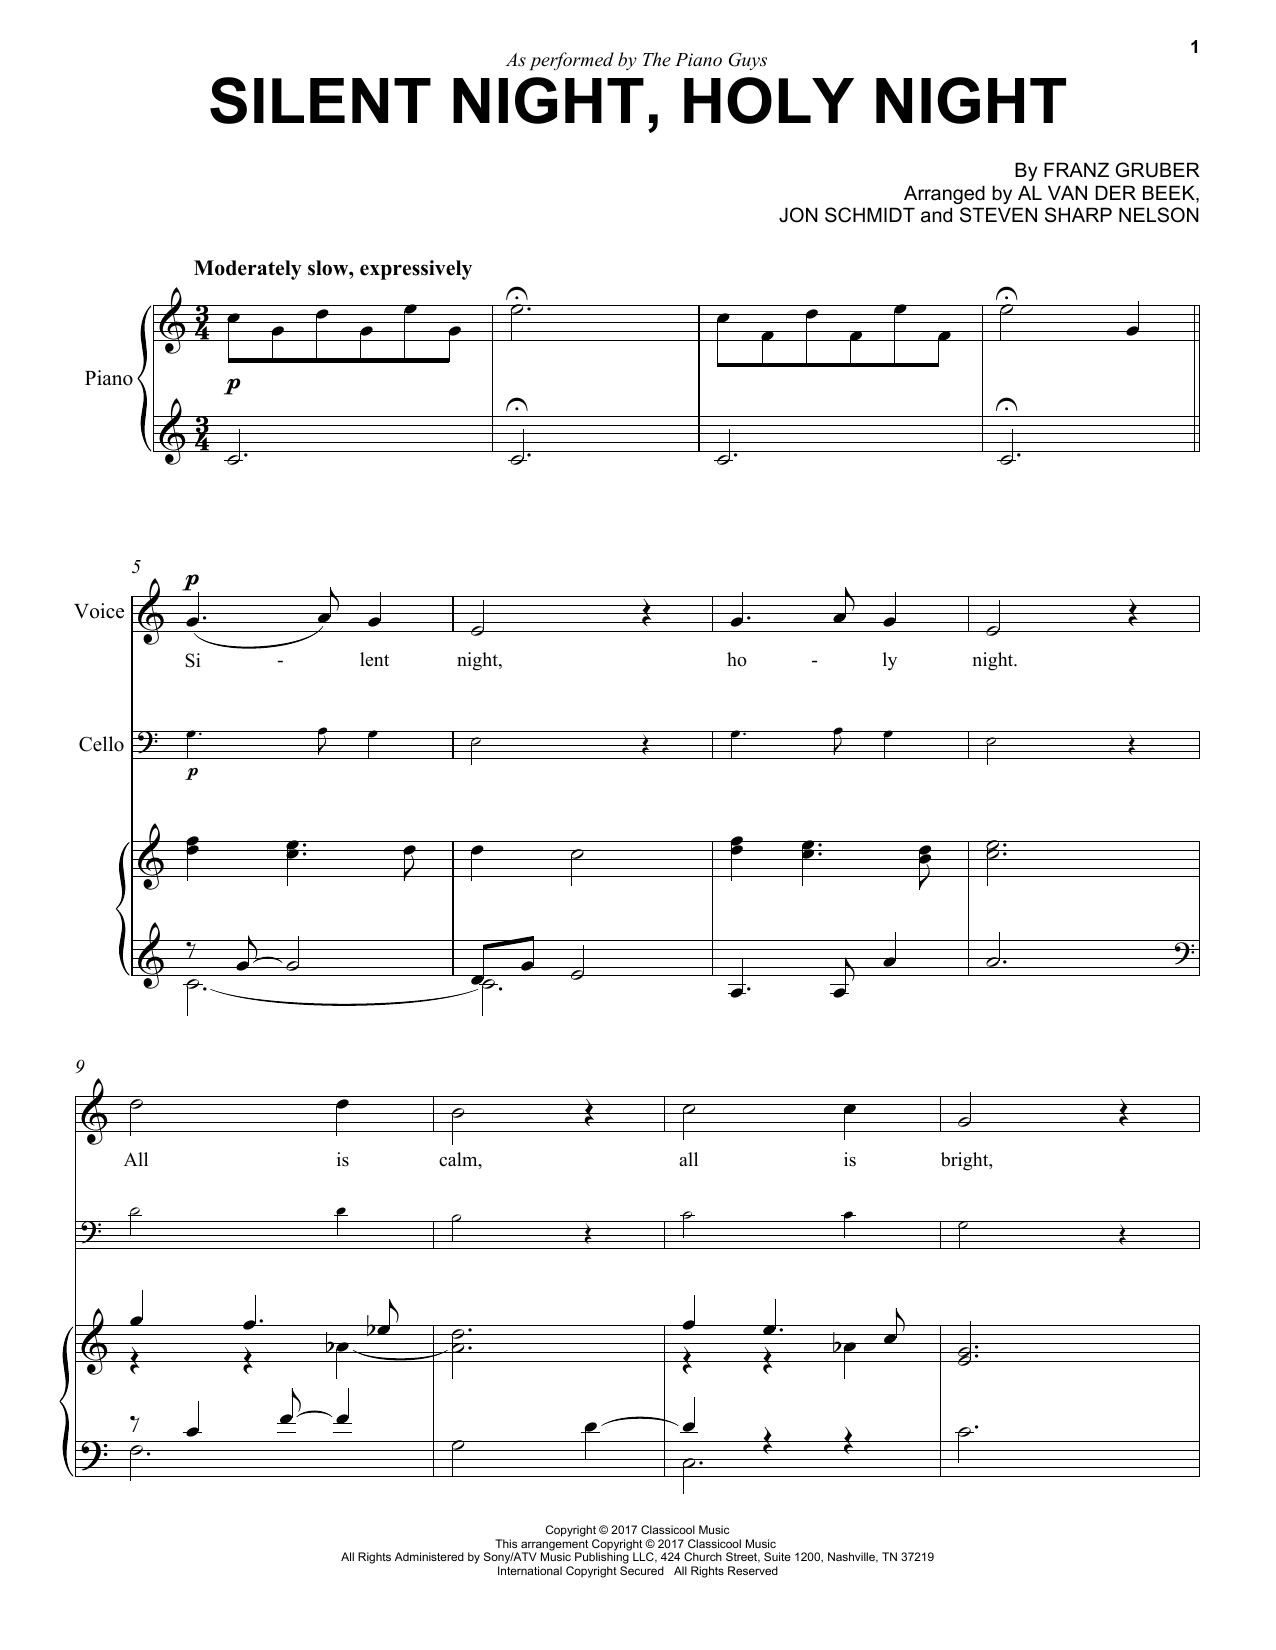 Download The Piano Guys Silent Night, Holy Night Sheet Music